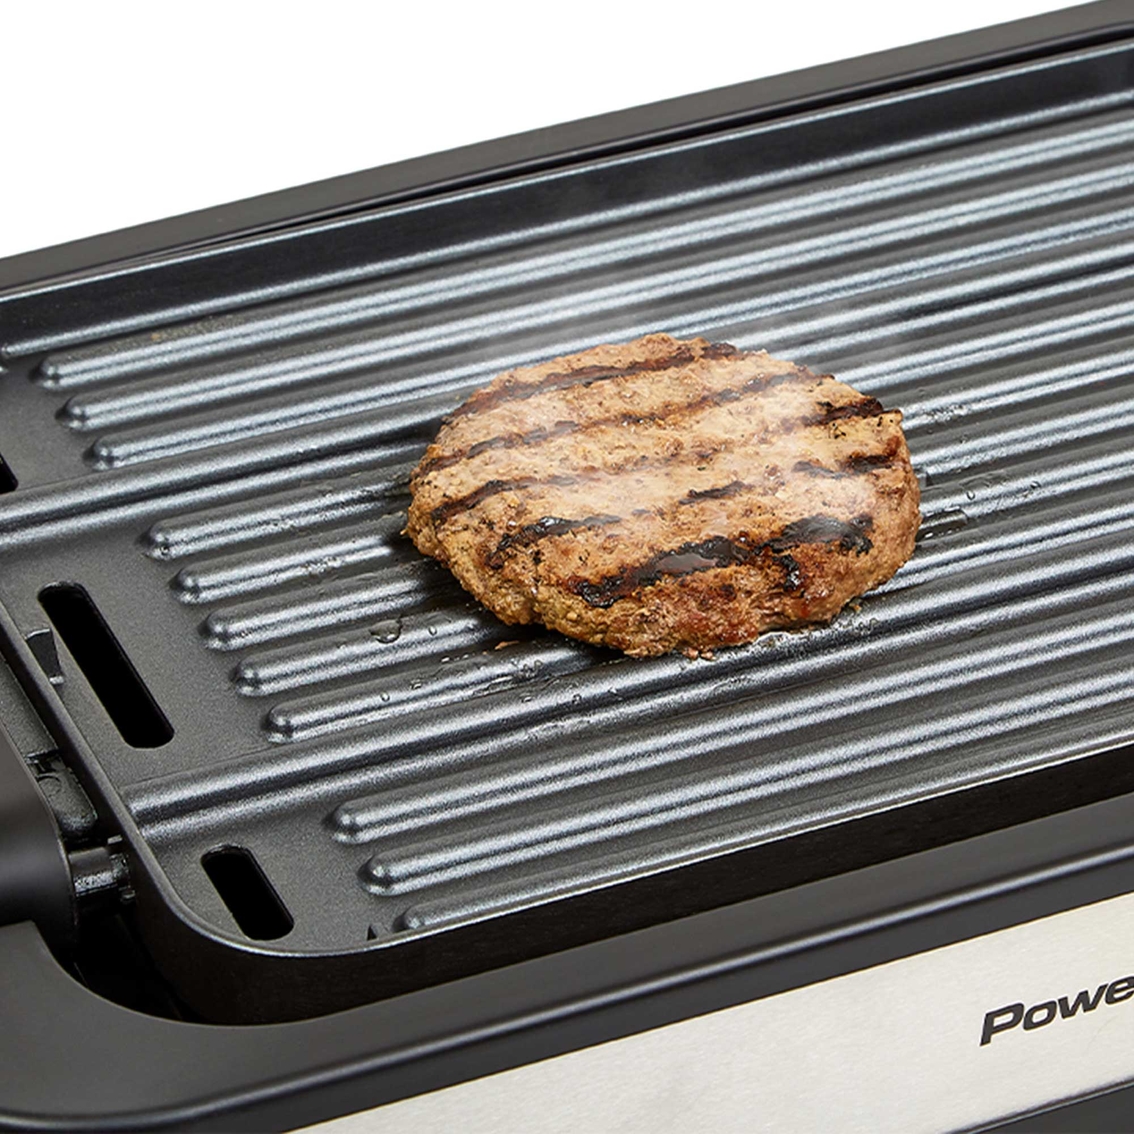 Power XL Indoor Grill & Griddle 